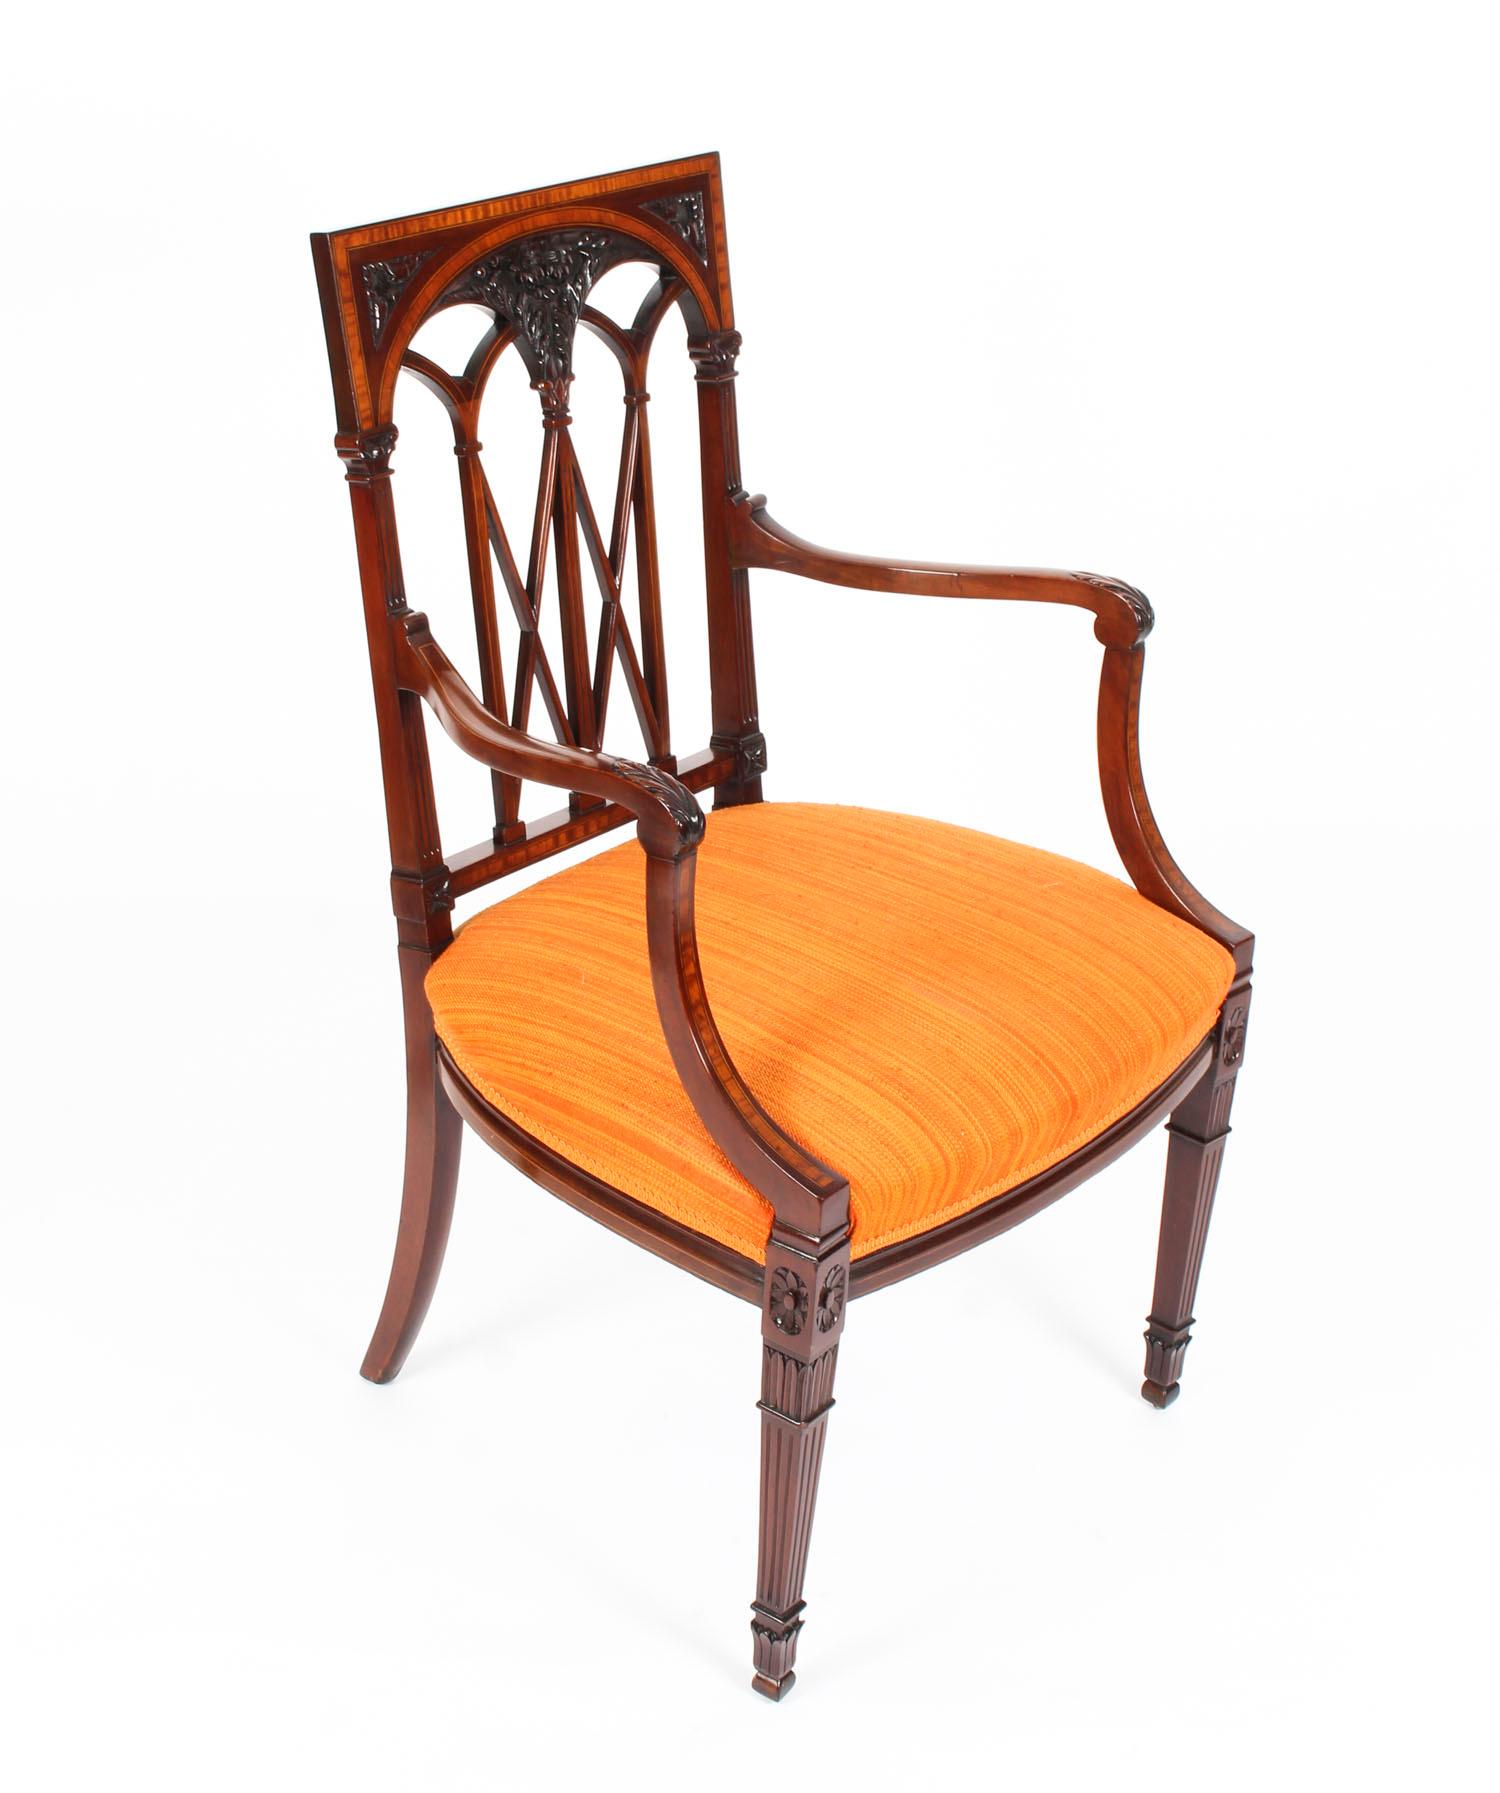 A striking set of six mahogany and satinwood banded dining chairs, in Sheraton Revival taste, to include a pair of armchairs, circa 1900 in date.

The high back chairs feature satinwood banding with boxwood and ebonized line inlay and wonderful